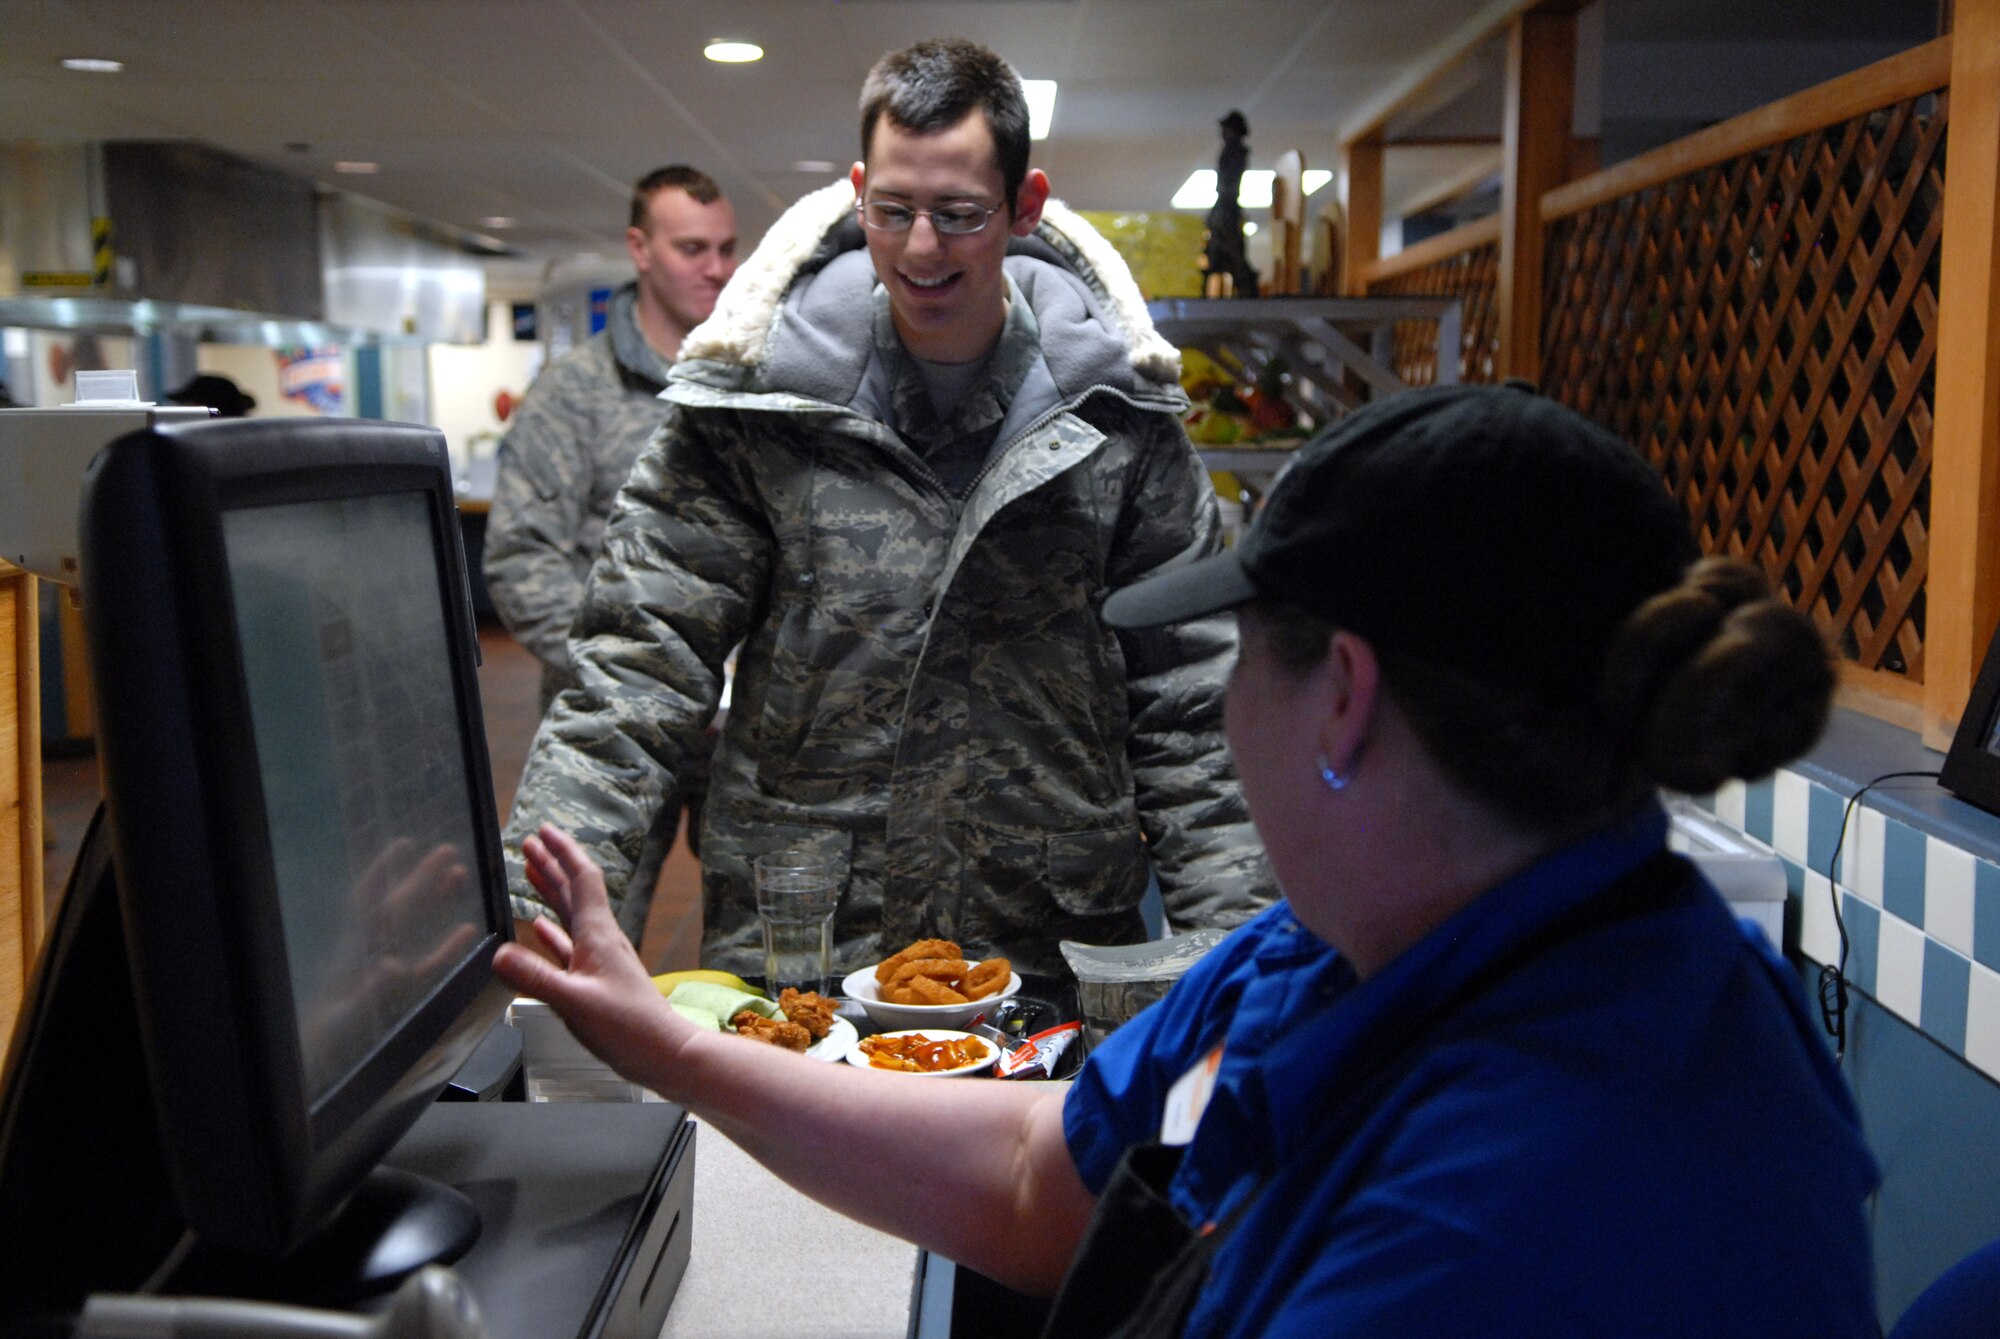 Cashier Rosie Hinds, 90th FSS, rings up Airman Daniel Ermis, 90th Missile Maintenance Squadron, lunch on the snack line at Chadwell Dining Facility on F. E. Warren Air Force Base, Wyo. Jan. 28. (U.S. Air Force photo by R.J. Oriez)